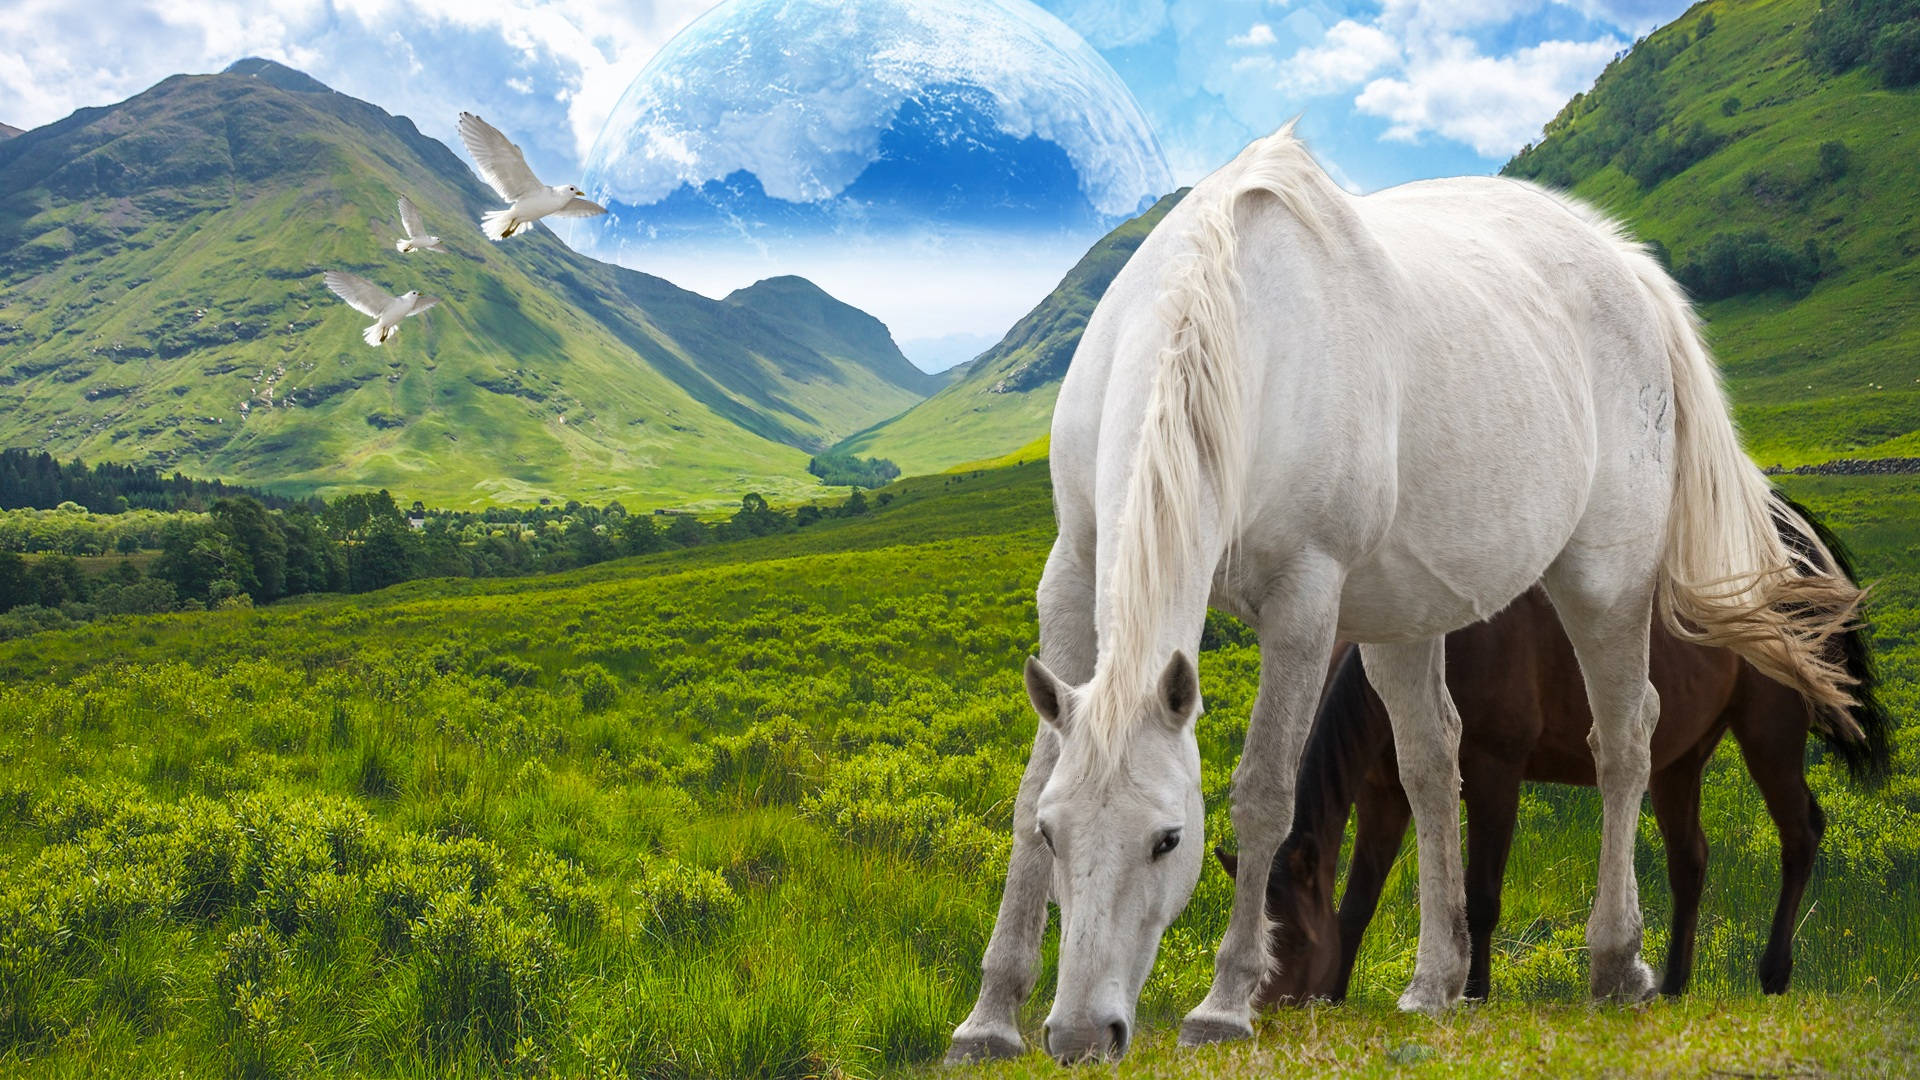 Green mountains with horses and birds fantasy art wallpaper.